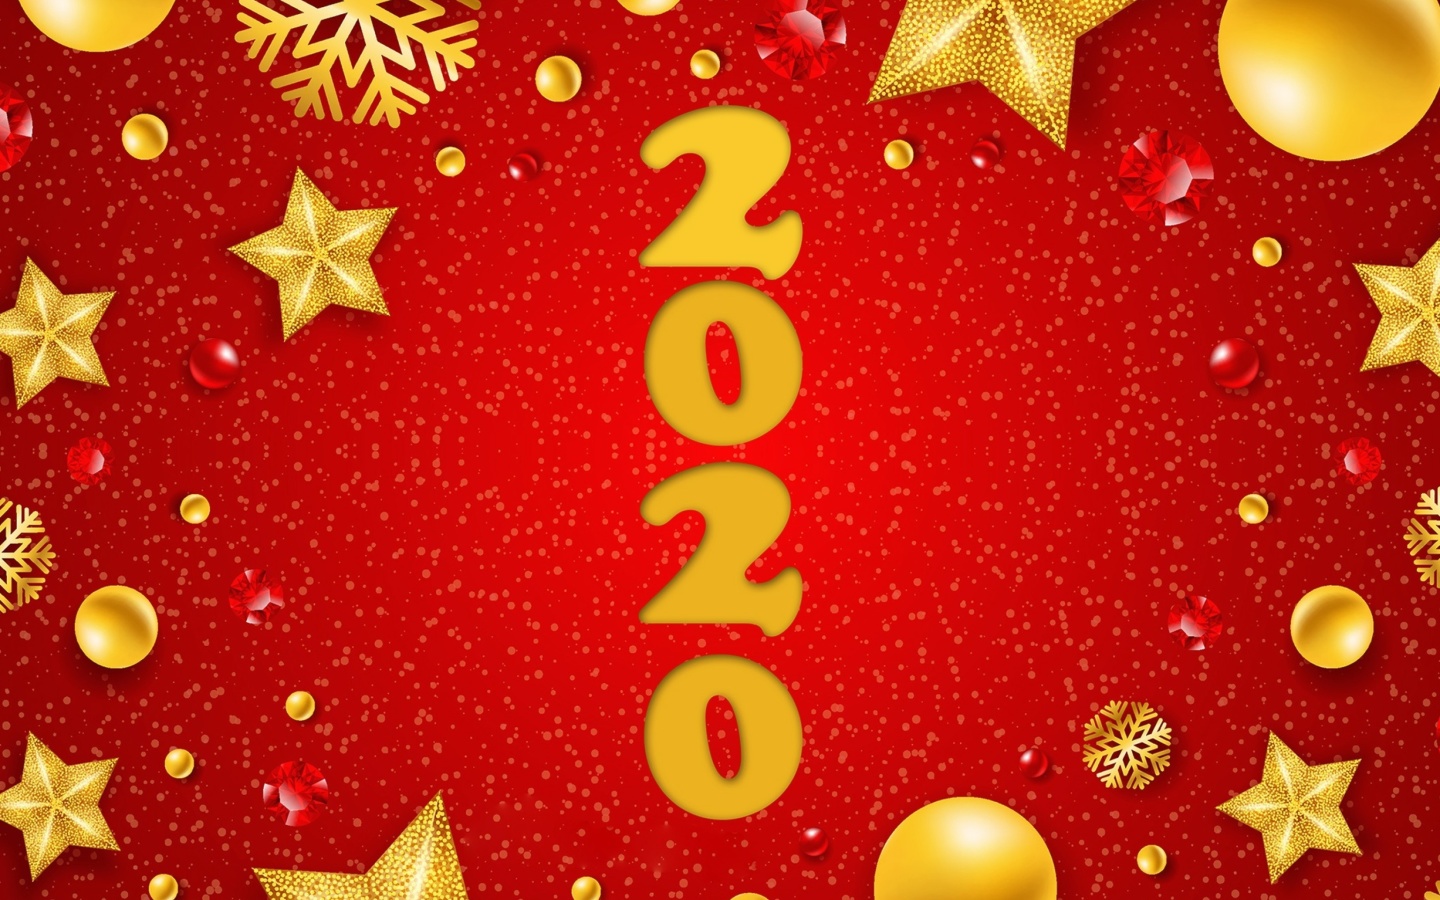 Happy New Year 2020 Messages screenshot #1 1440x900